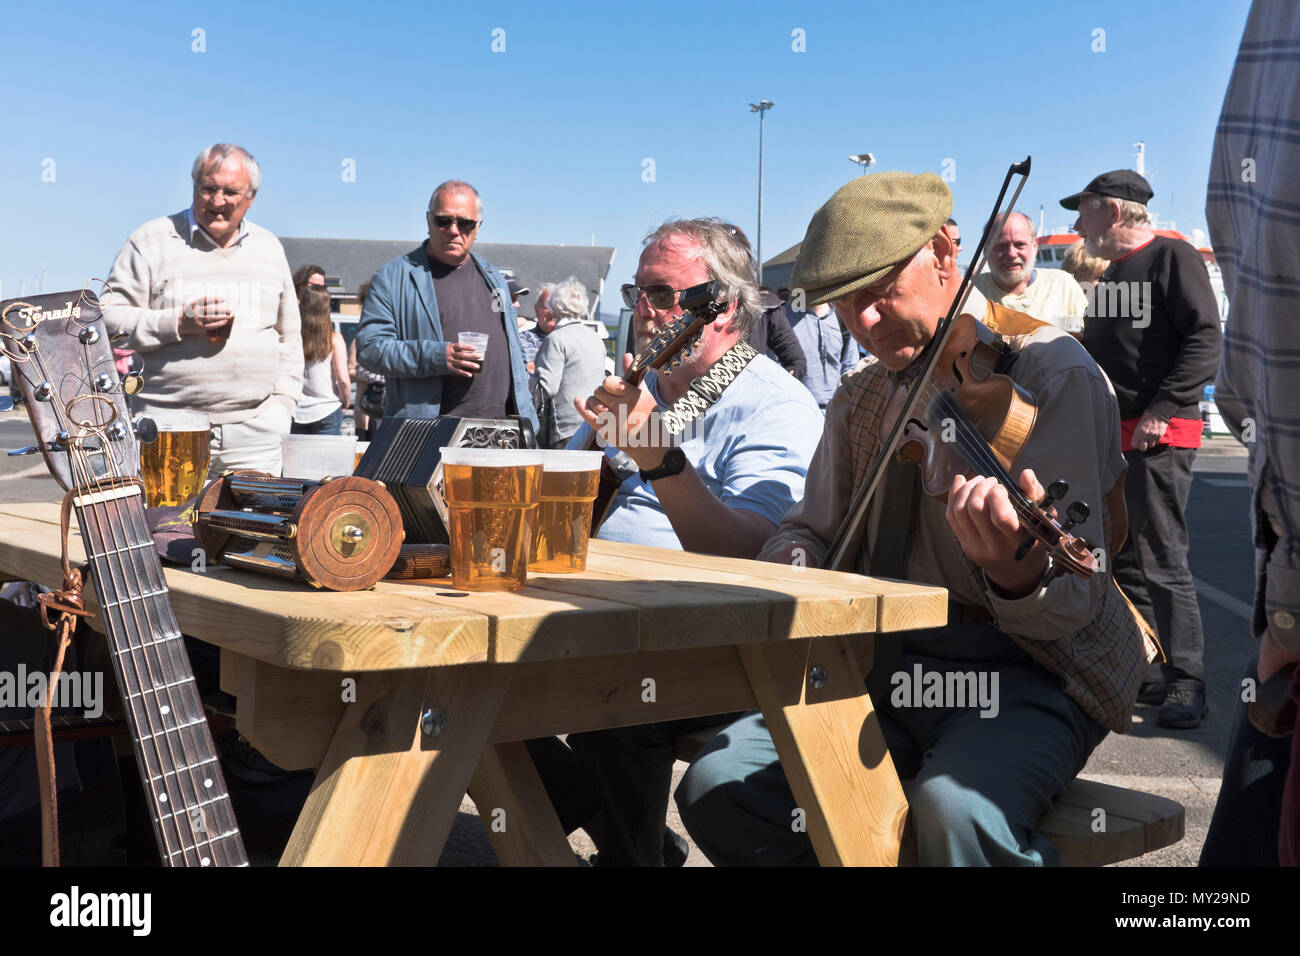 dh Folk Festival musicians STROMNESS ORKNEY Scottish musician playing instruments outdoors fiddle guitar music outdoor pub scotland Stock Photo